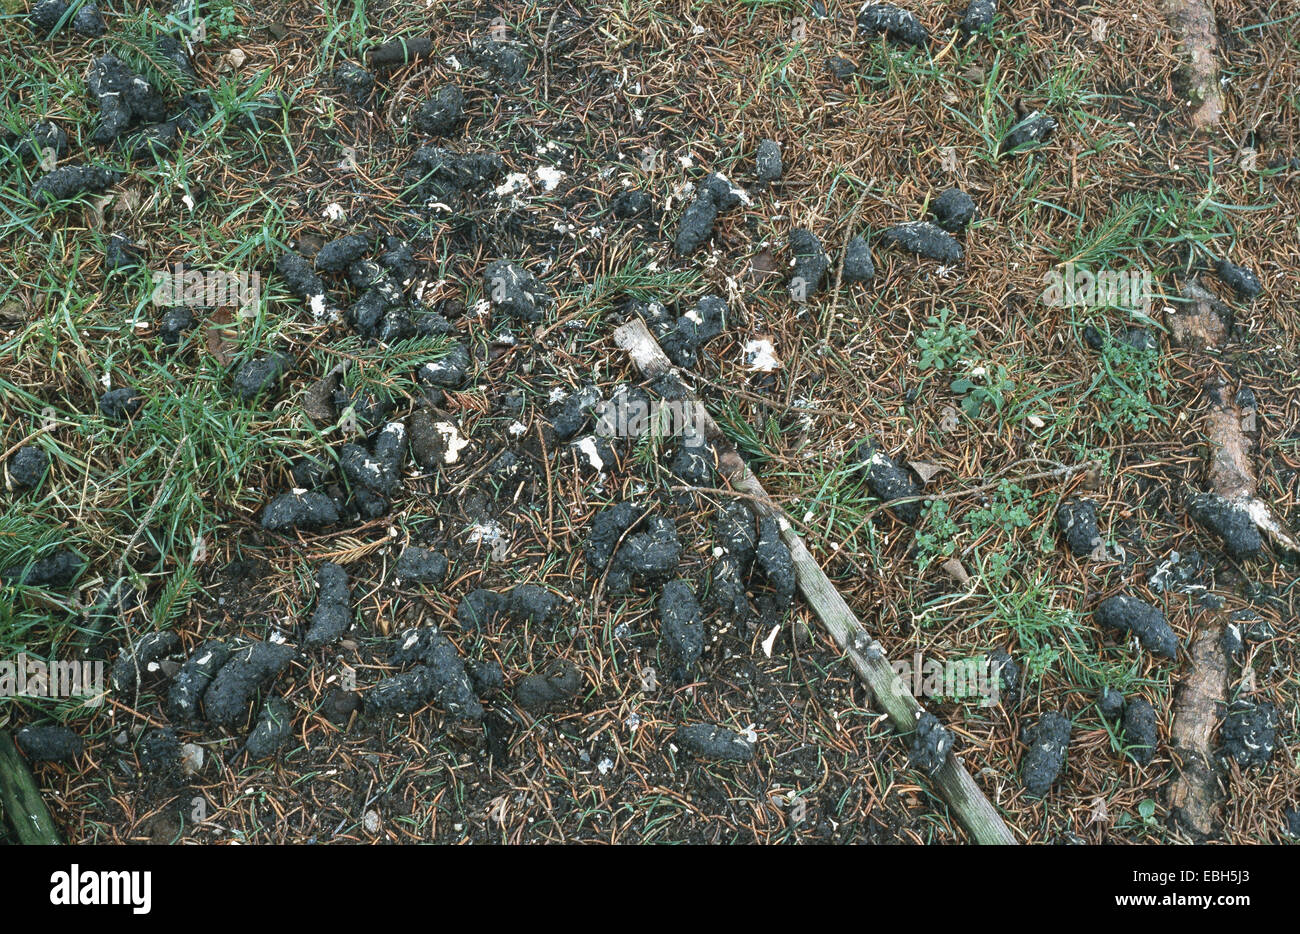 long-eared owl (Asio otus), owl pellets under a resting place. Stock Photo